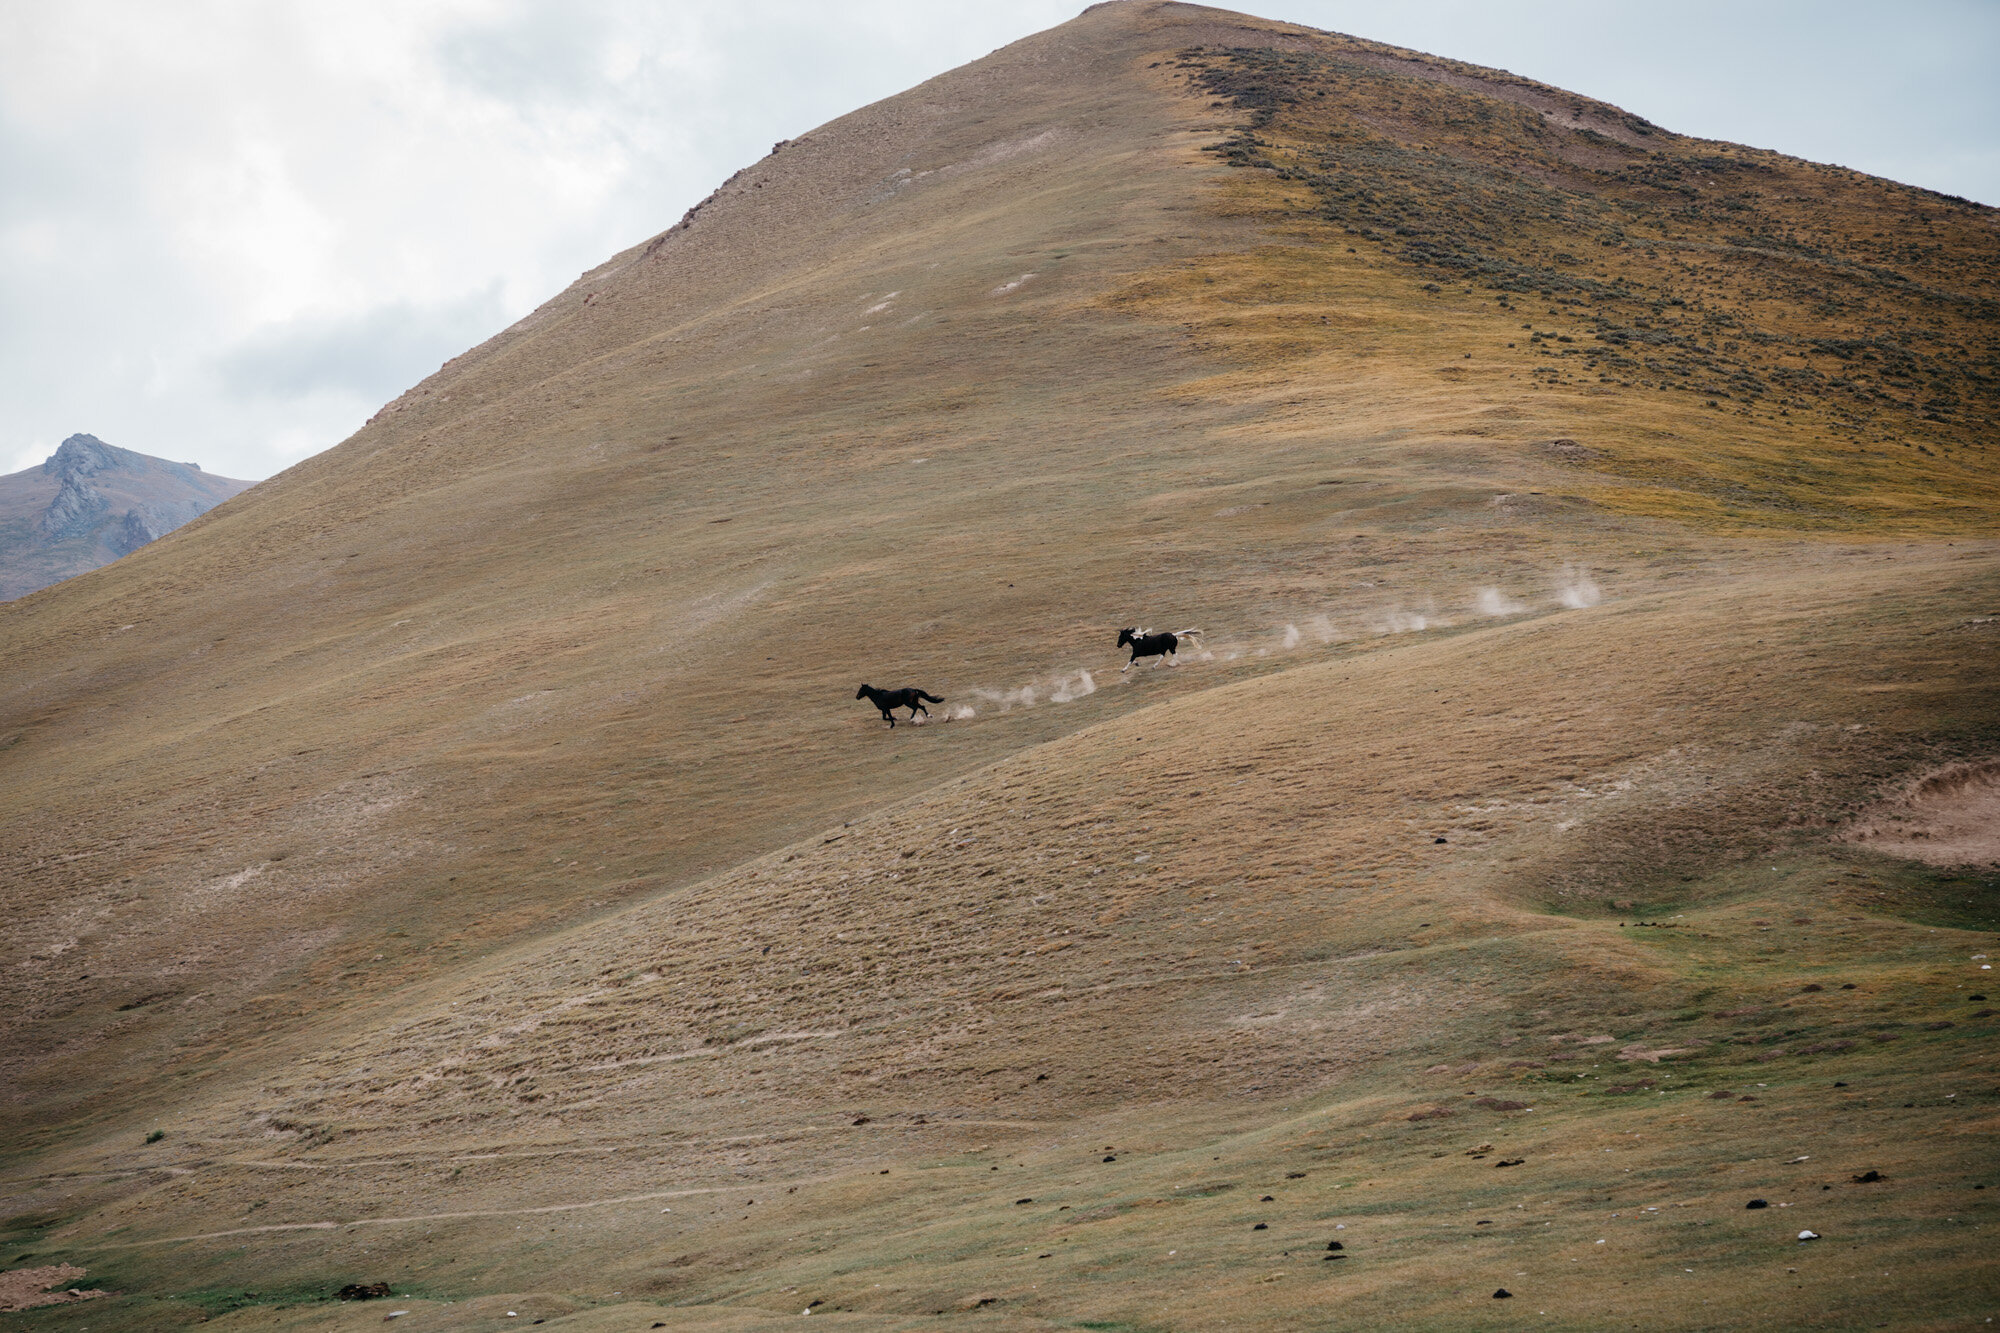  Horses belonging to the nearby villagers galloping through the mountains 